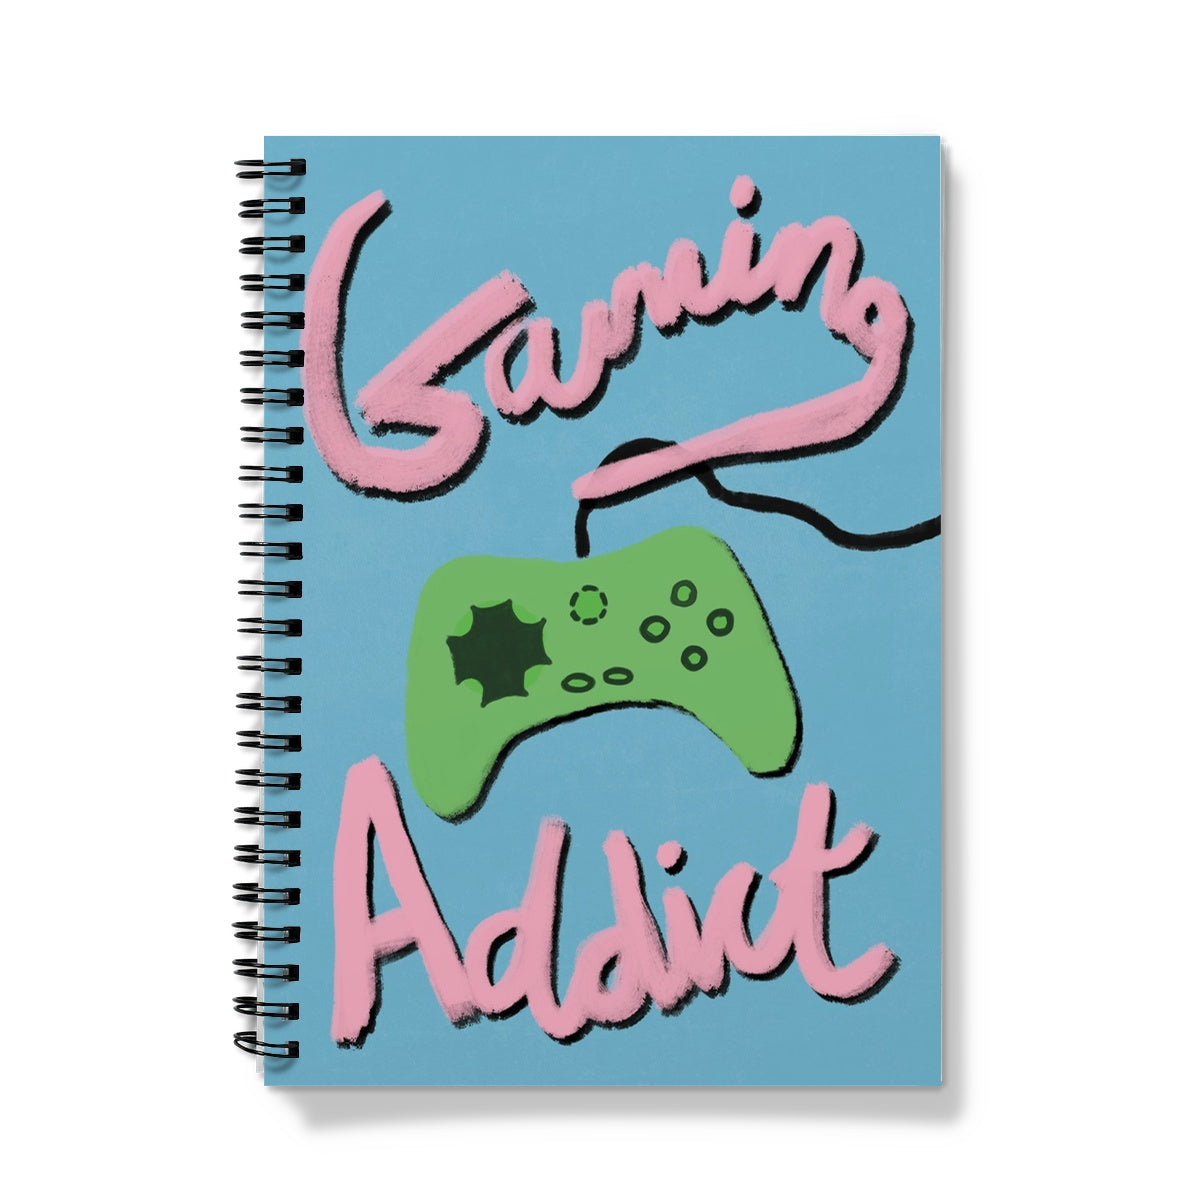 Gaming Addict Print - Blue, Pink, Green Notebook